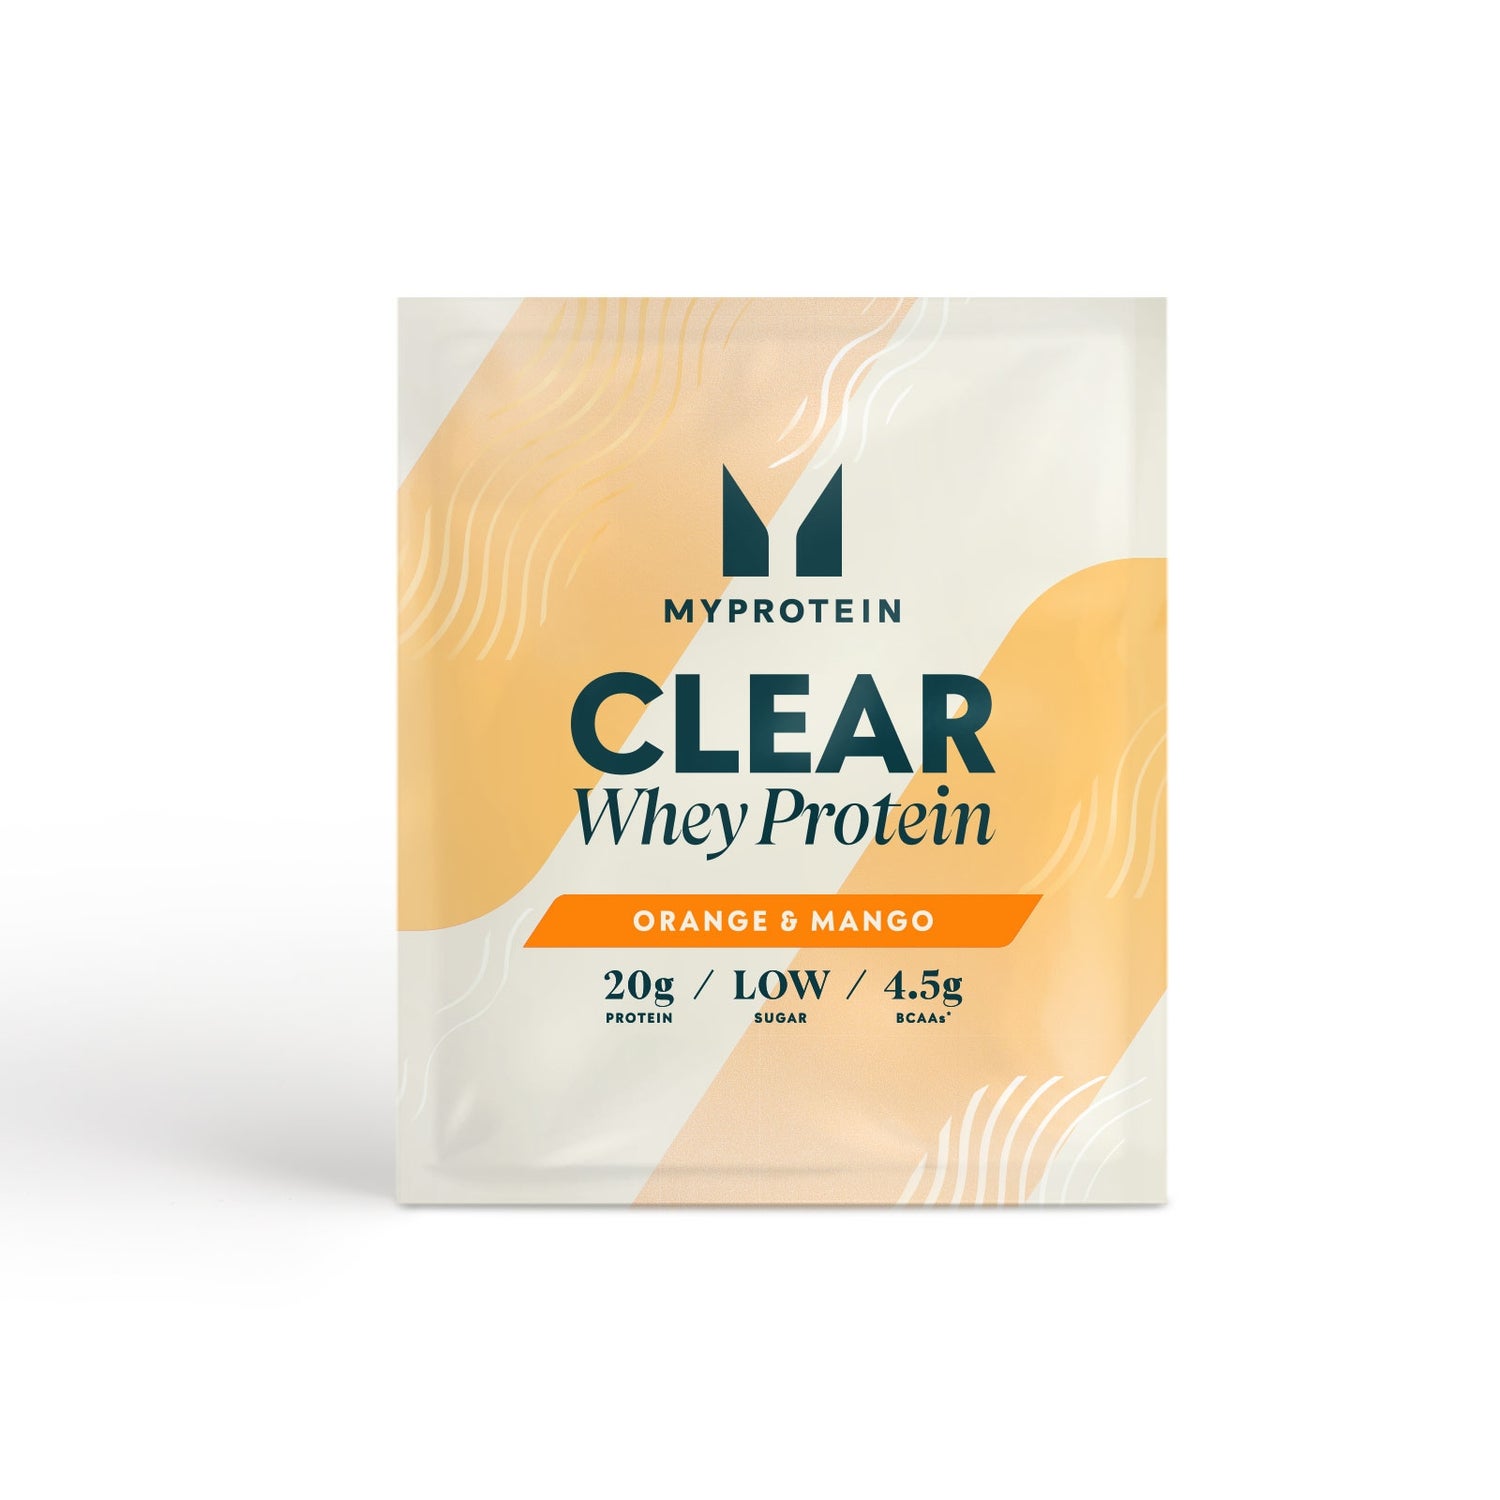 Myprotein Clear Whey Isolate (Sample) - 1servings - Orange Mango